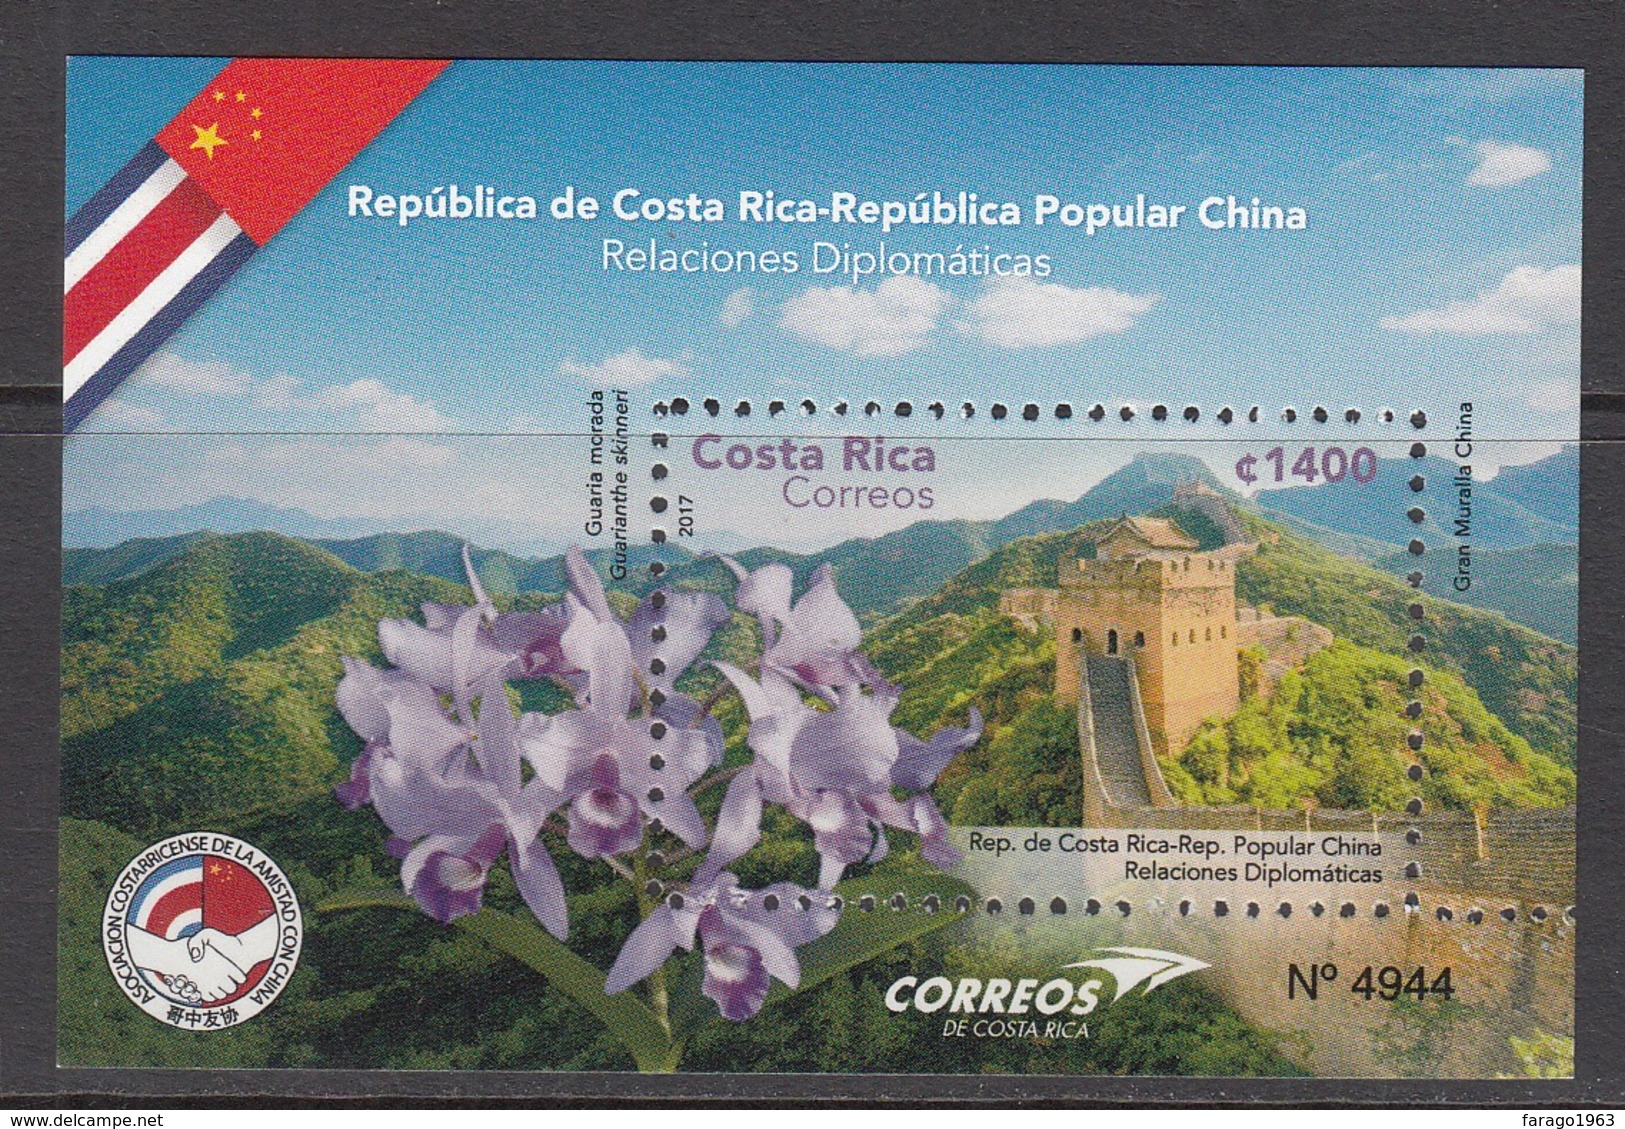 2017 Costa Rica Links With China Great Wall Souvenir Sheet MNH - Costa Rica